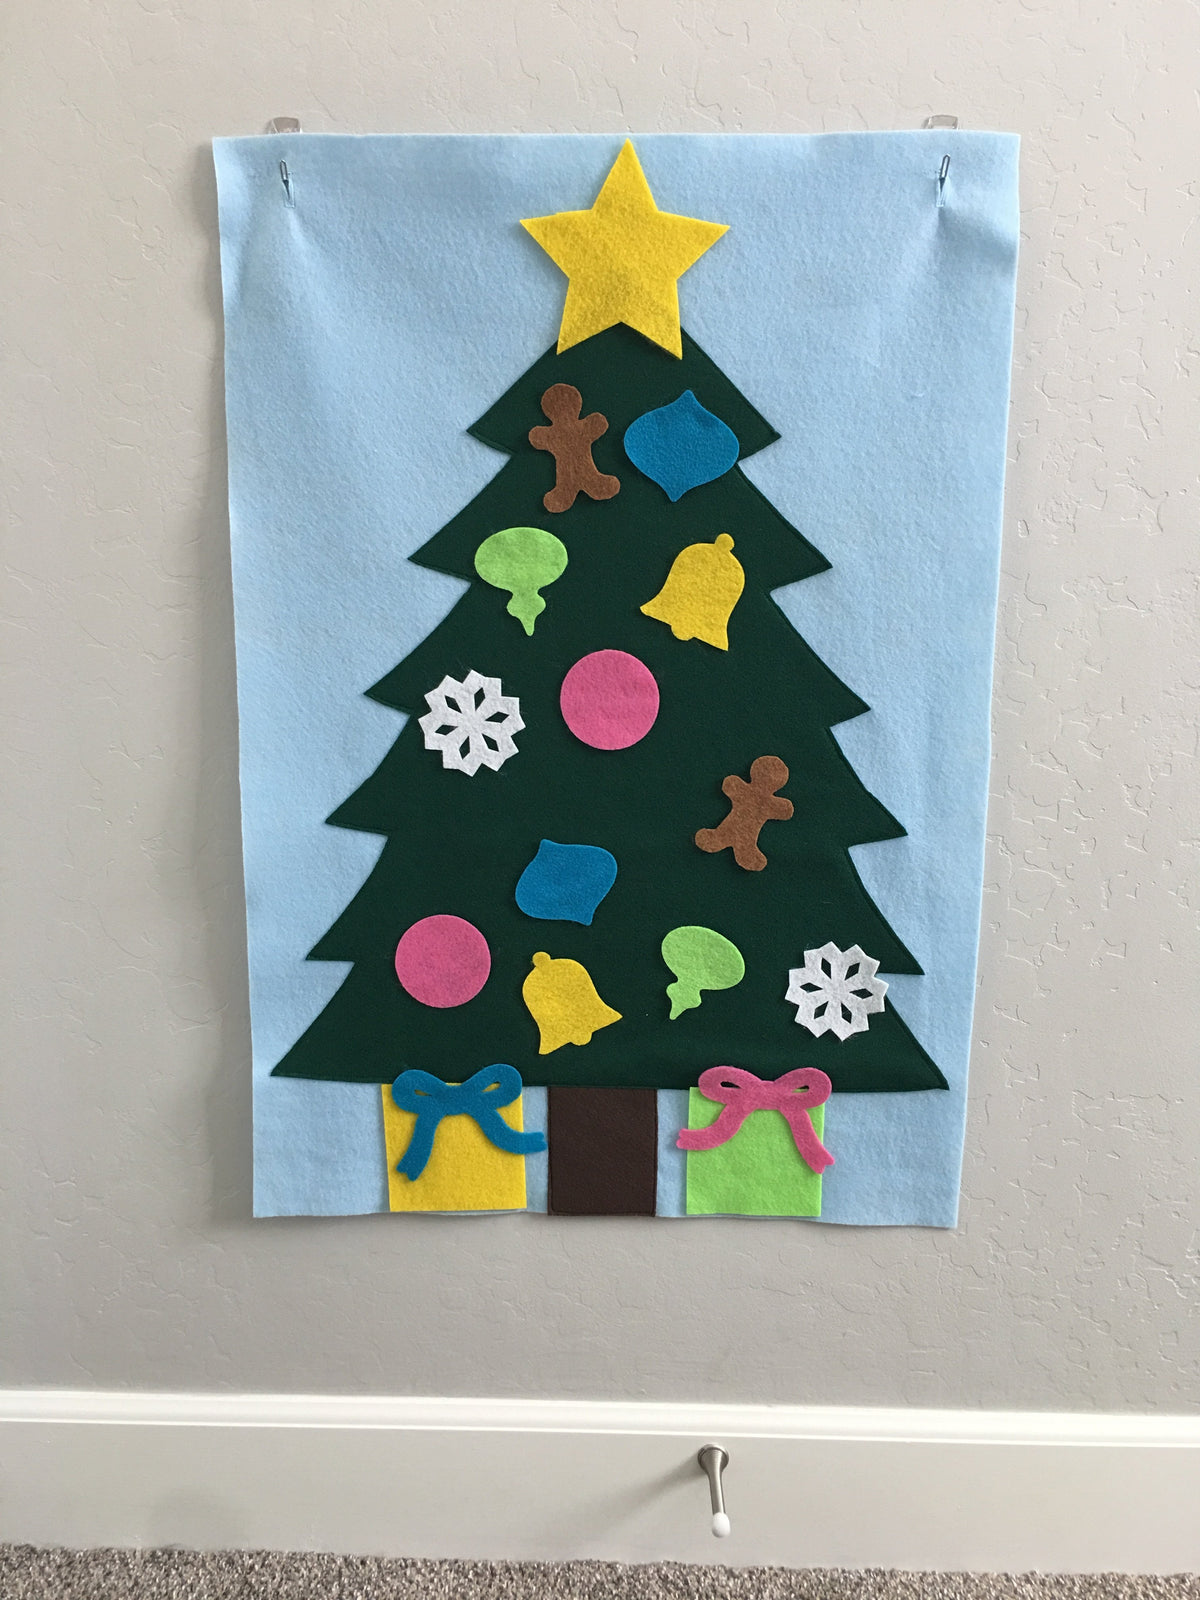 This felt Christmas tree is perfect for toddlers and preschoolers to decorate over and over.